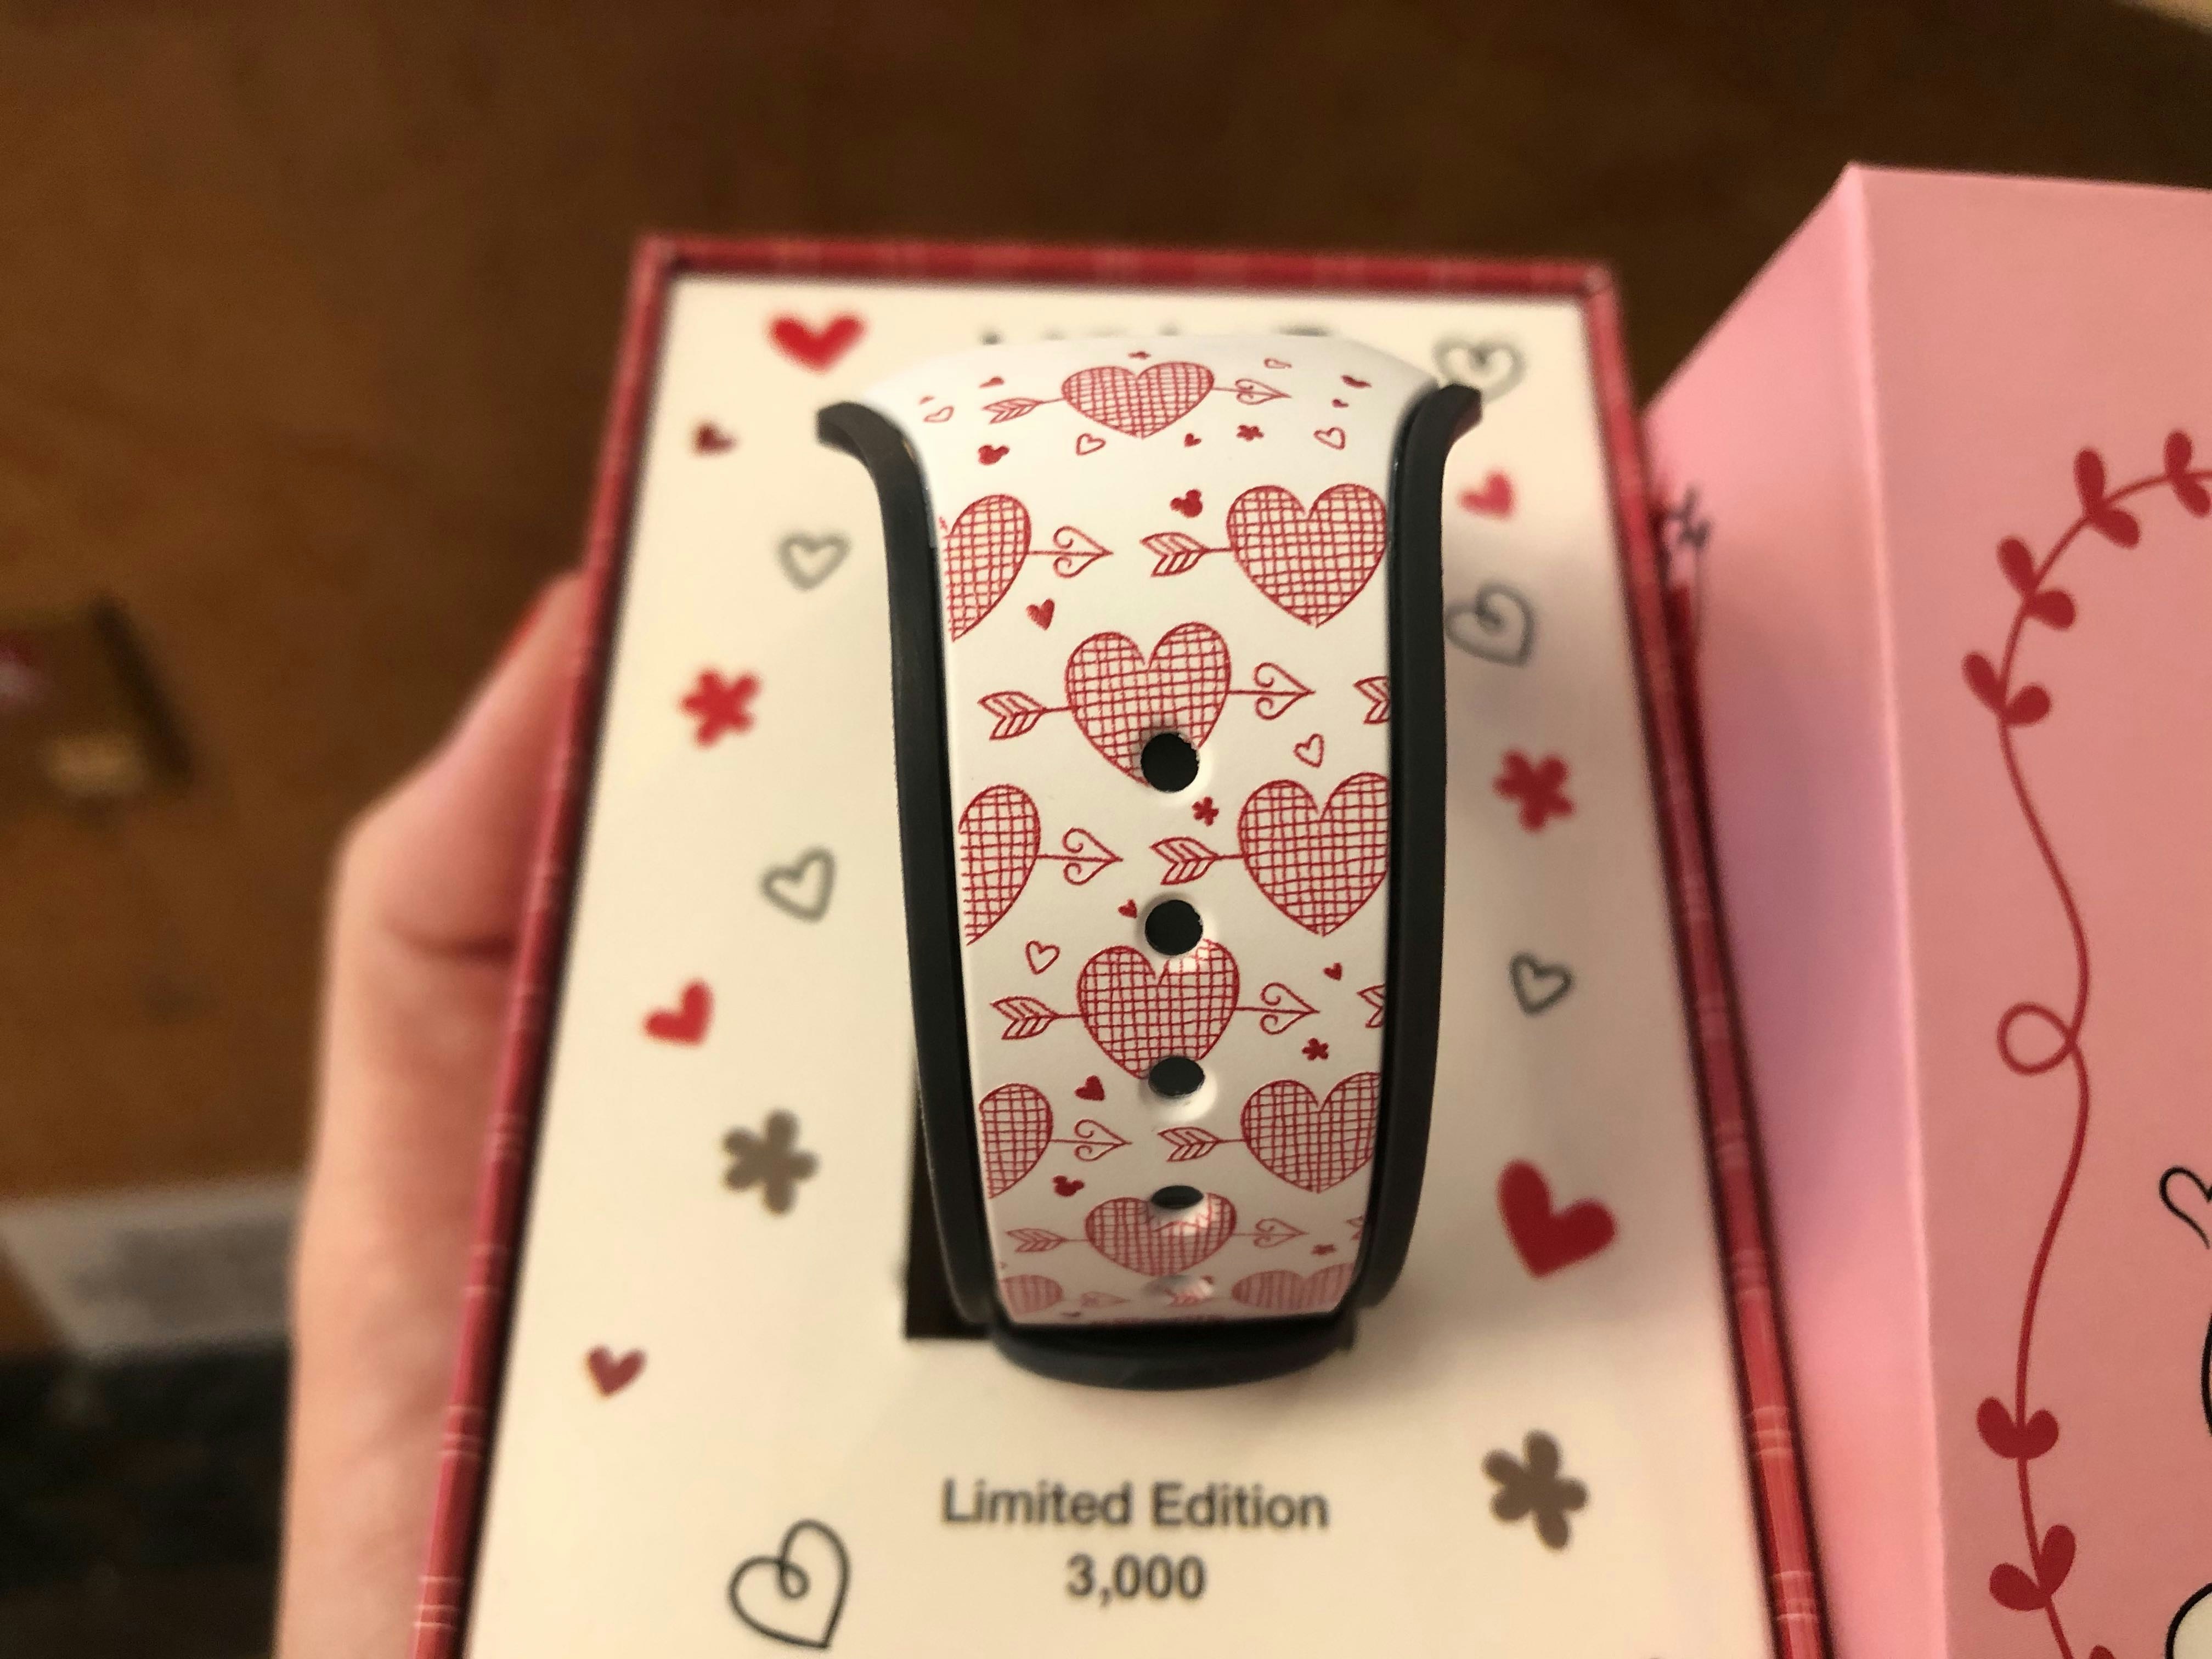 valentines day limited edition magicband 2020 4.jpg?auto=compress%2Cformat&ixlib=php 1.2